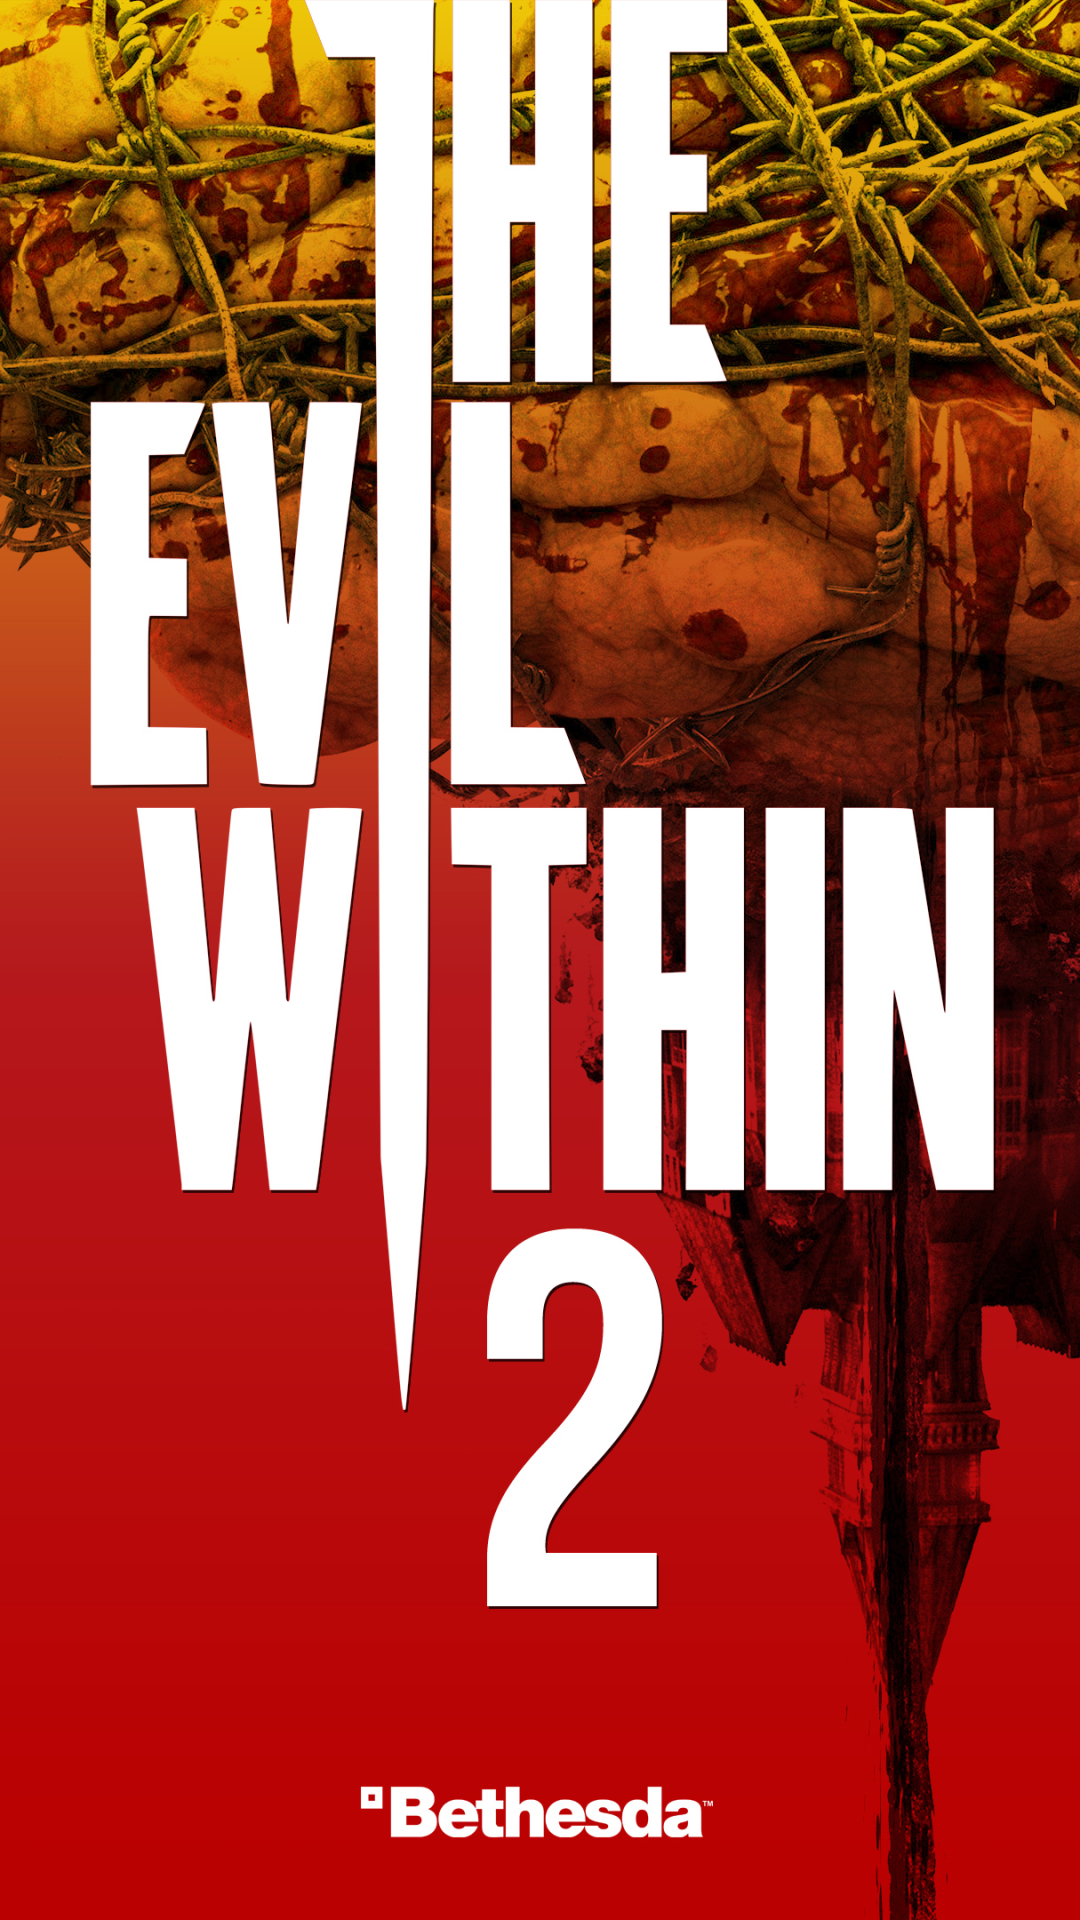 video game, the evil within 2 5K